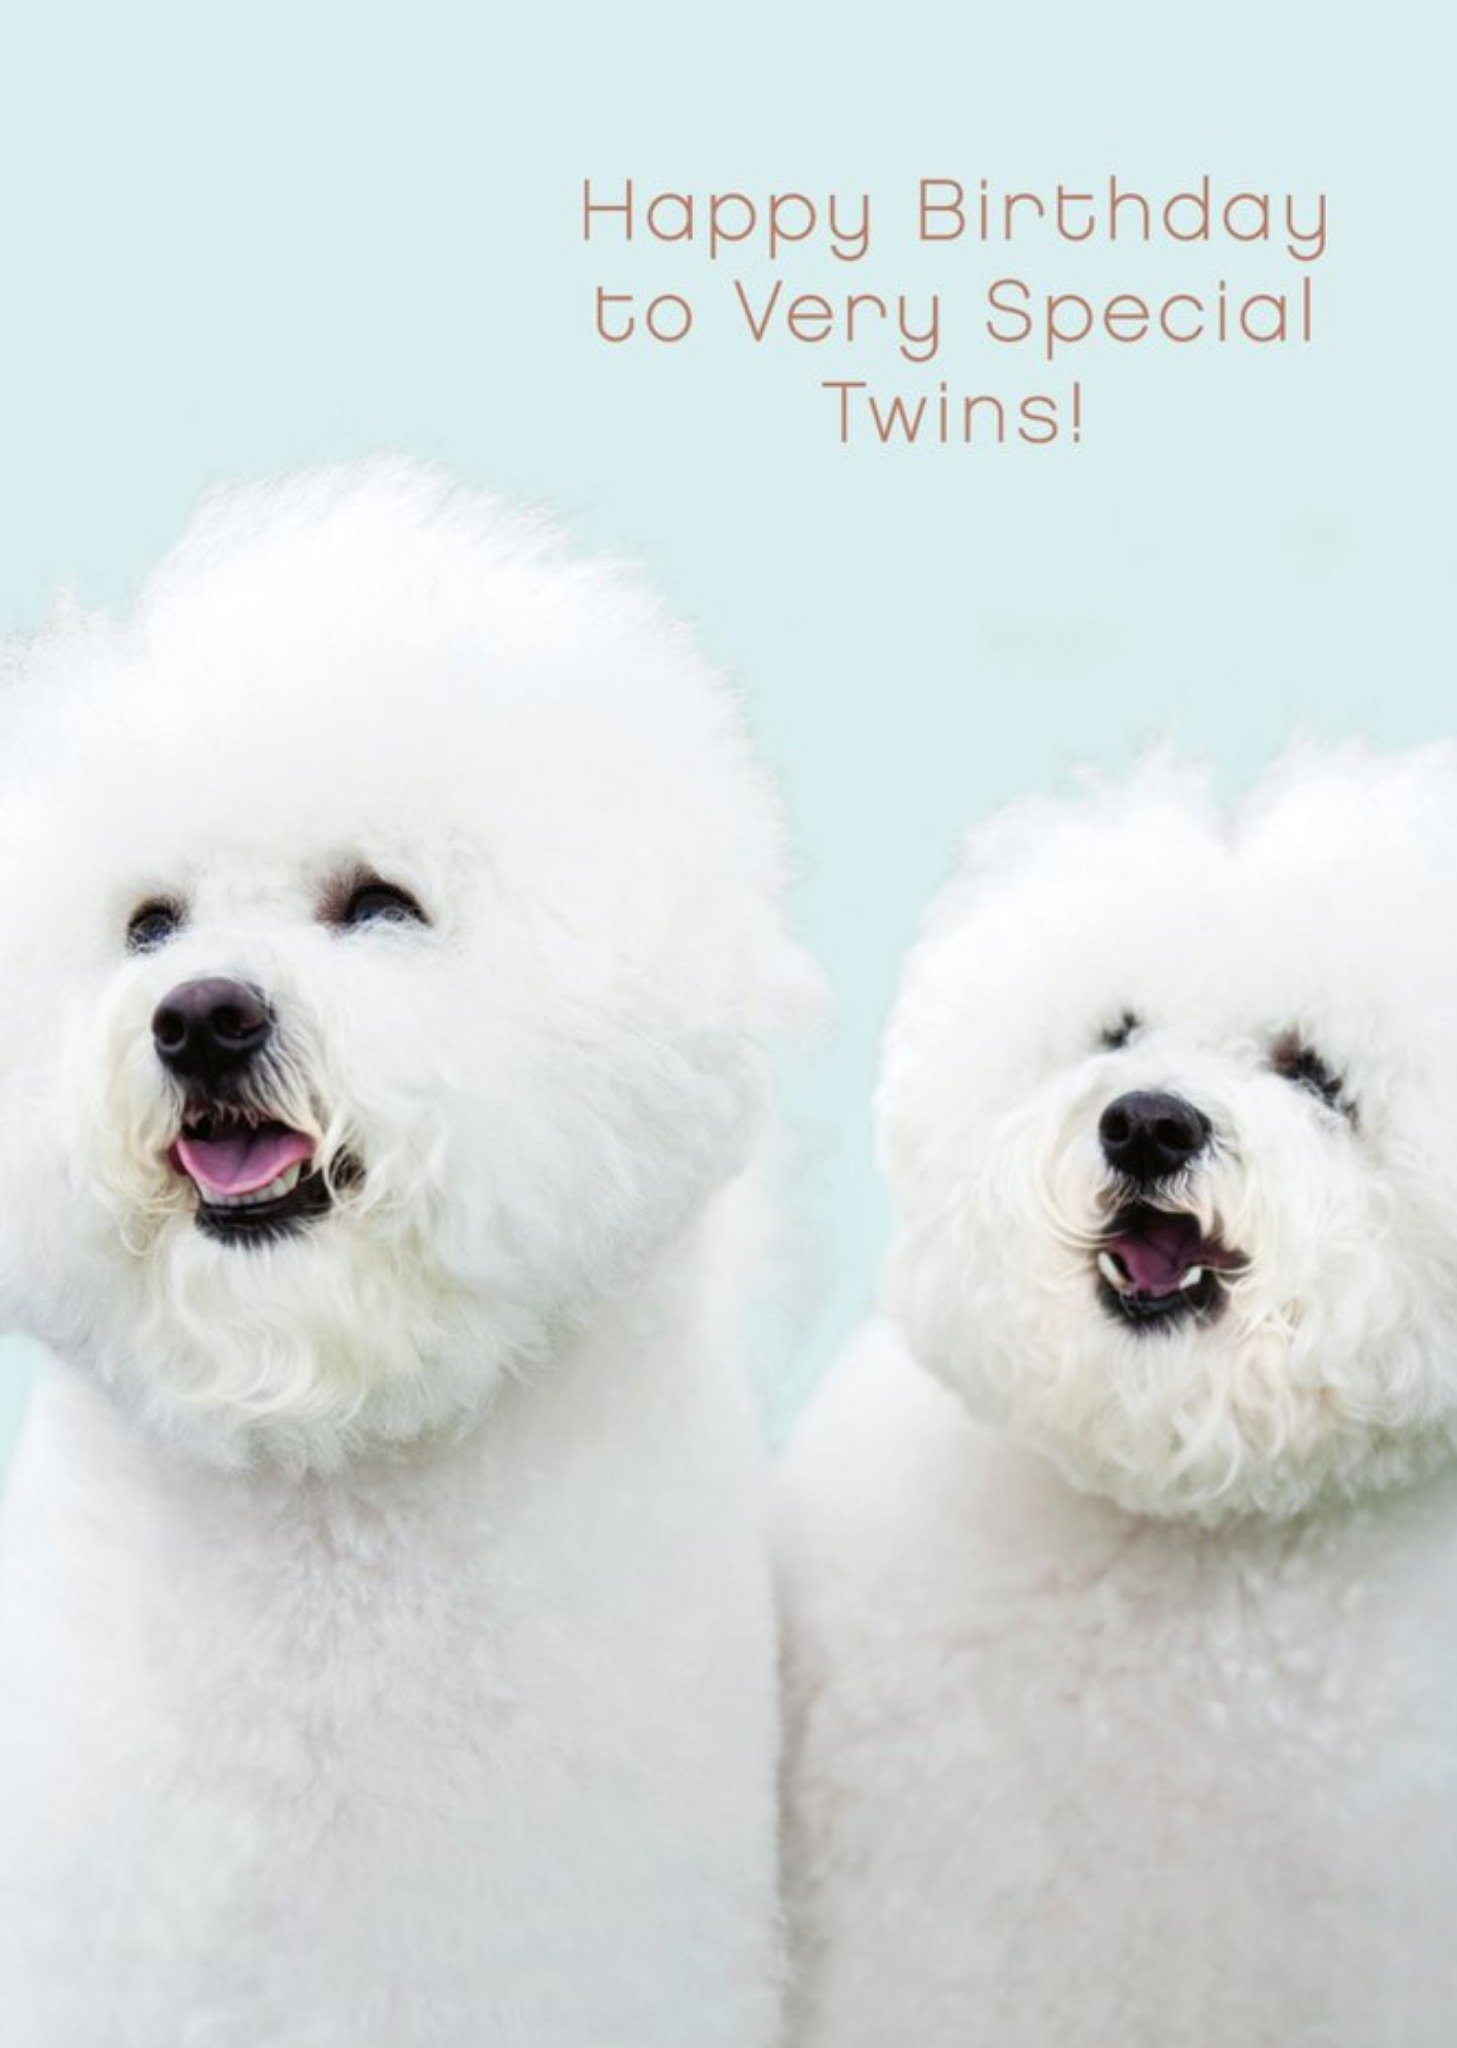 Moonpig Uk Greetings Carlton Cards Dogs Cute Special Twins Birthday Card, Large